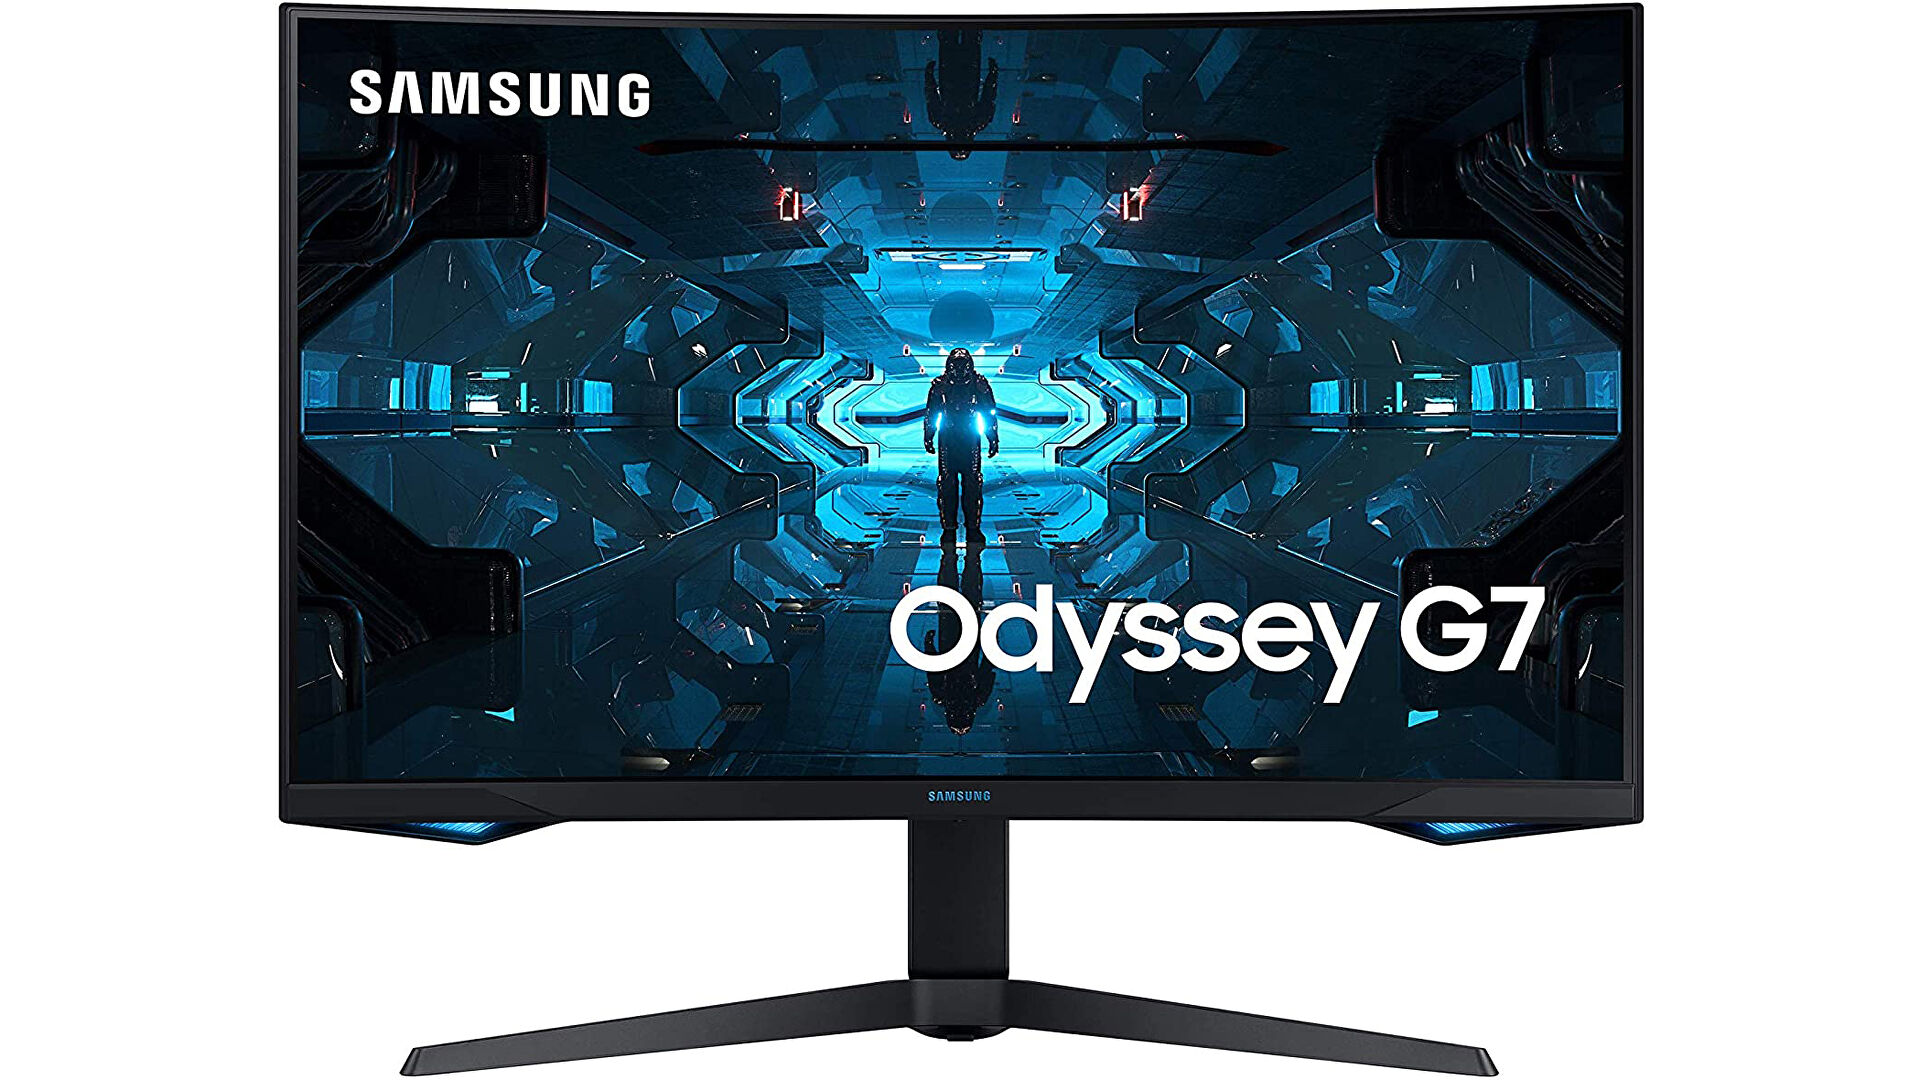 Pick up the Samsung Odyssey G7 32-in 1440p 240Hz gaming monitor for £499